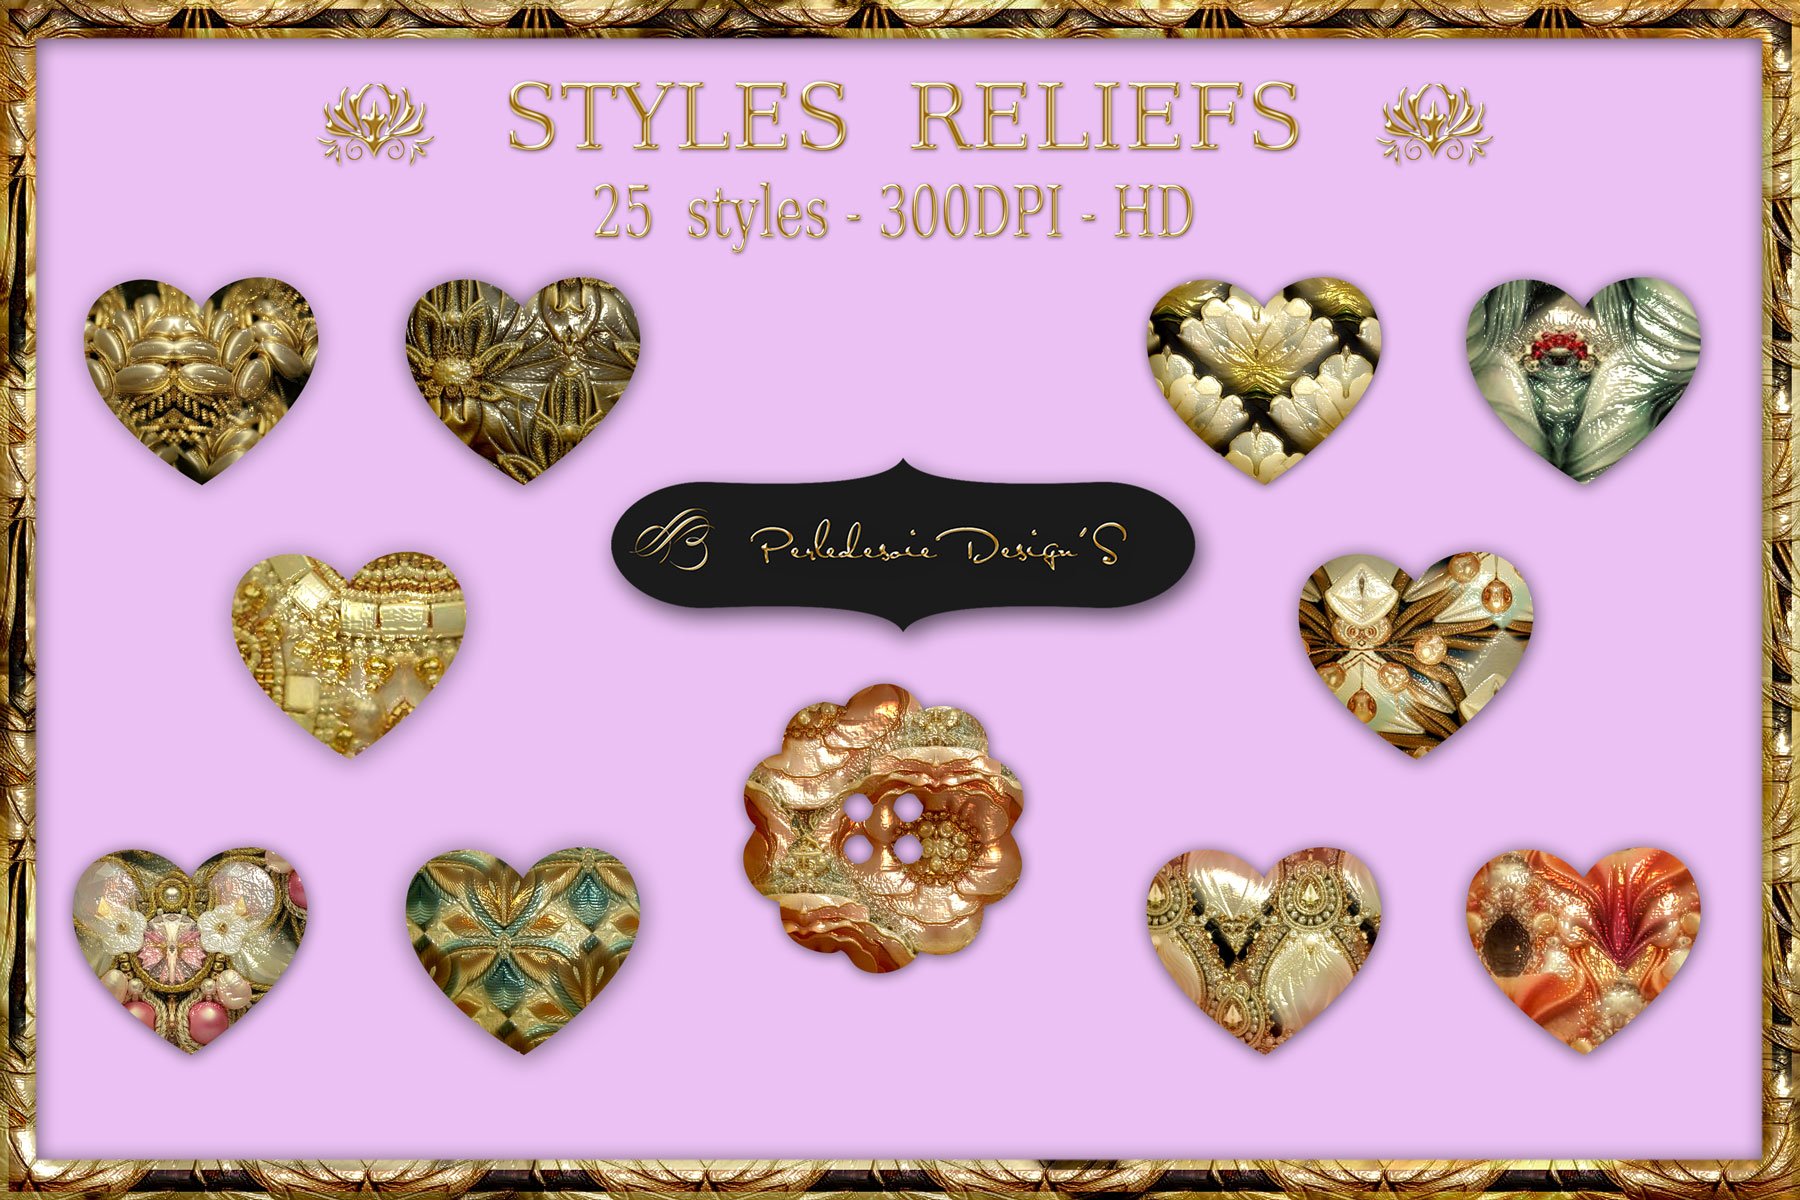 Styles Reliefpreview image.